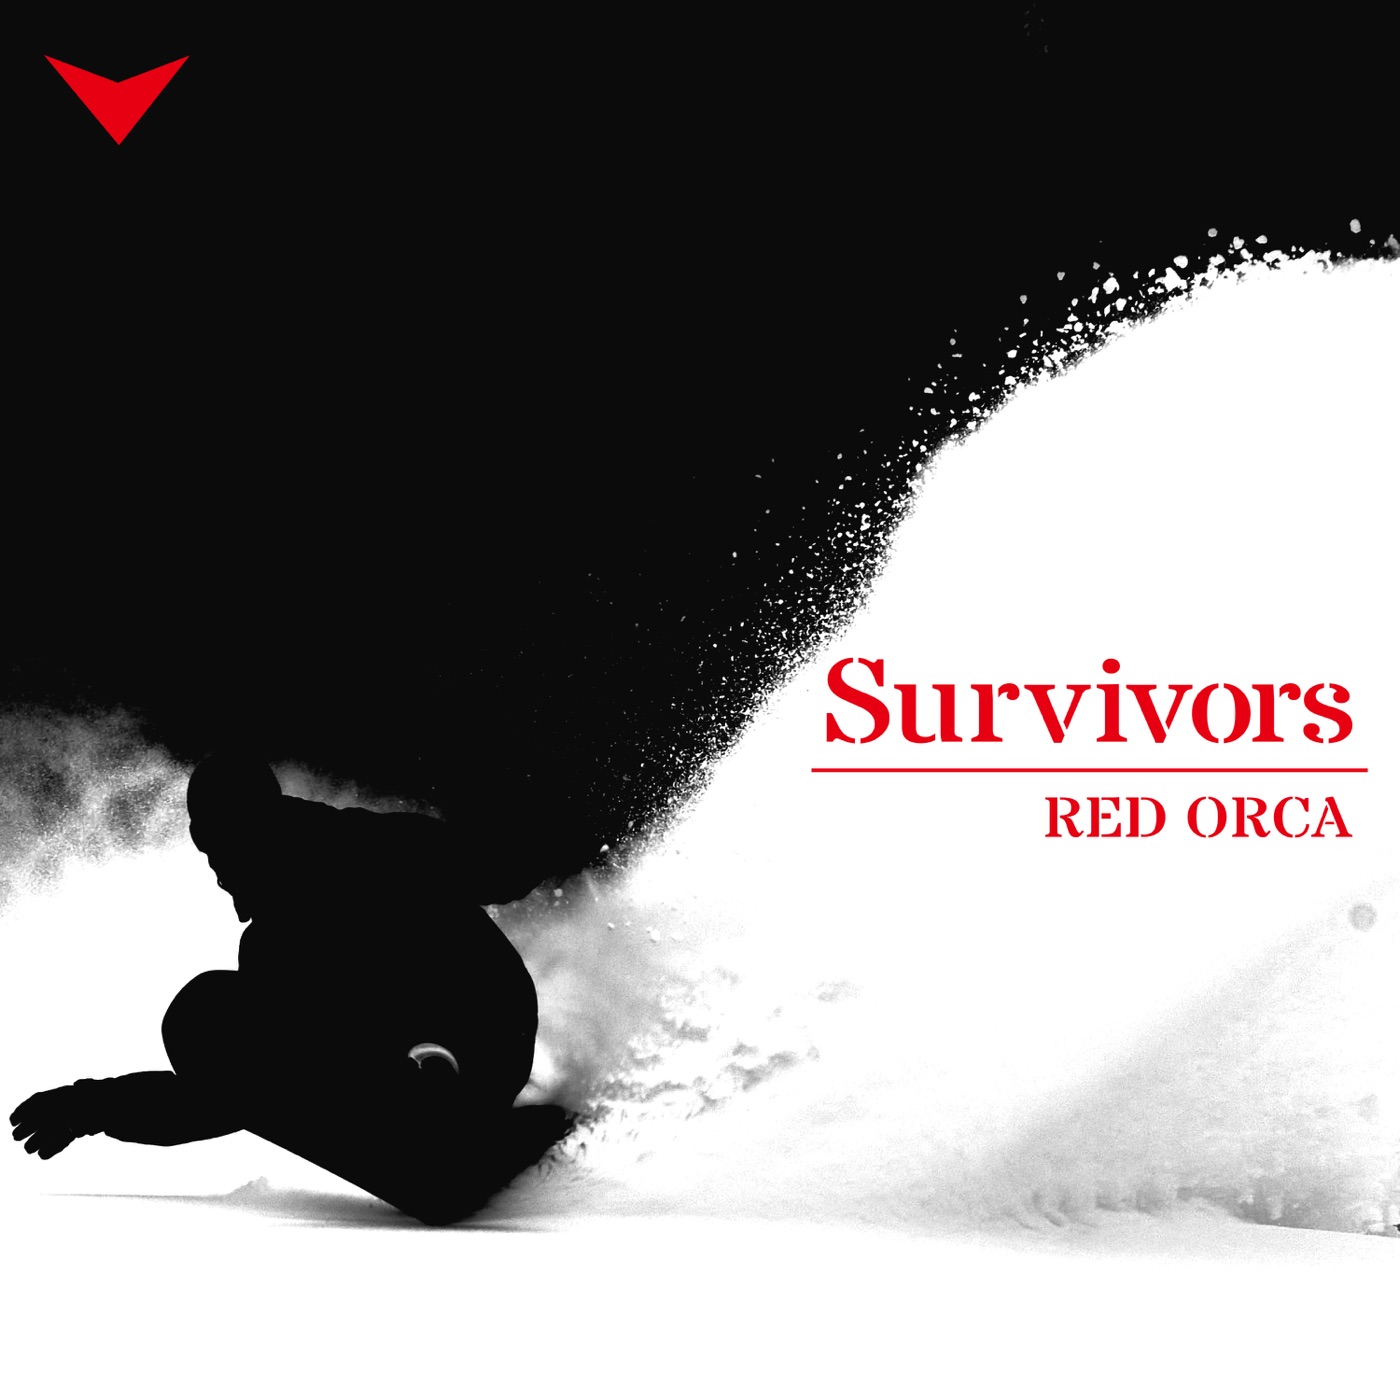 Survivors by RED ORCA